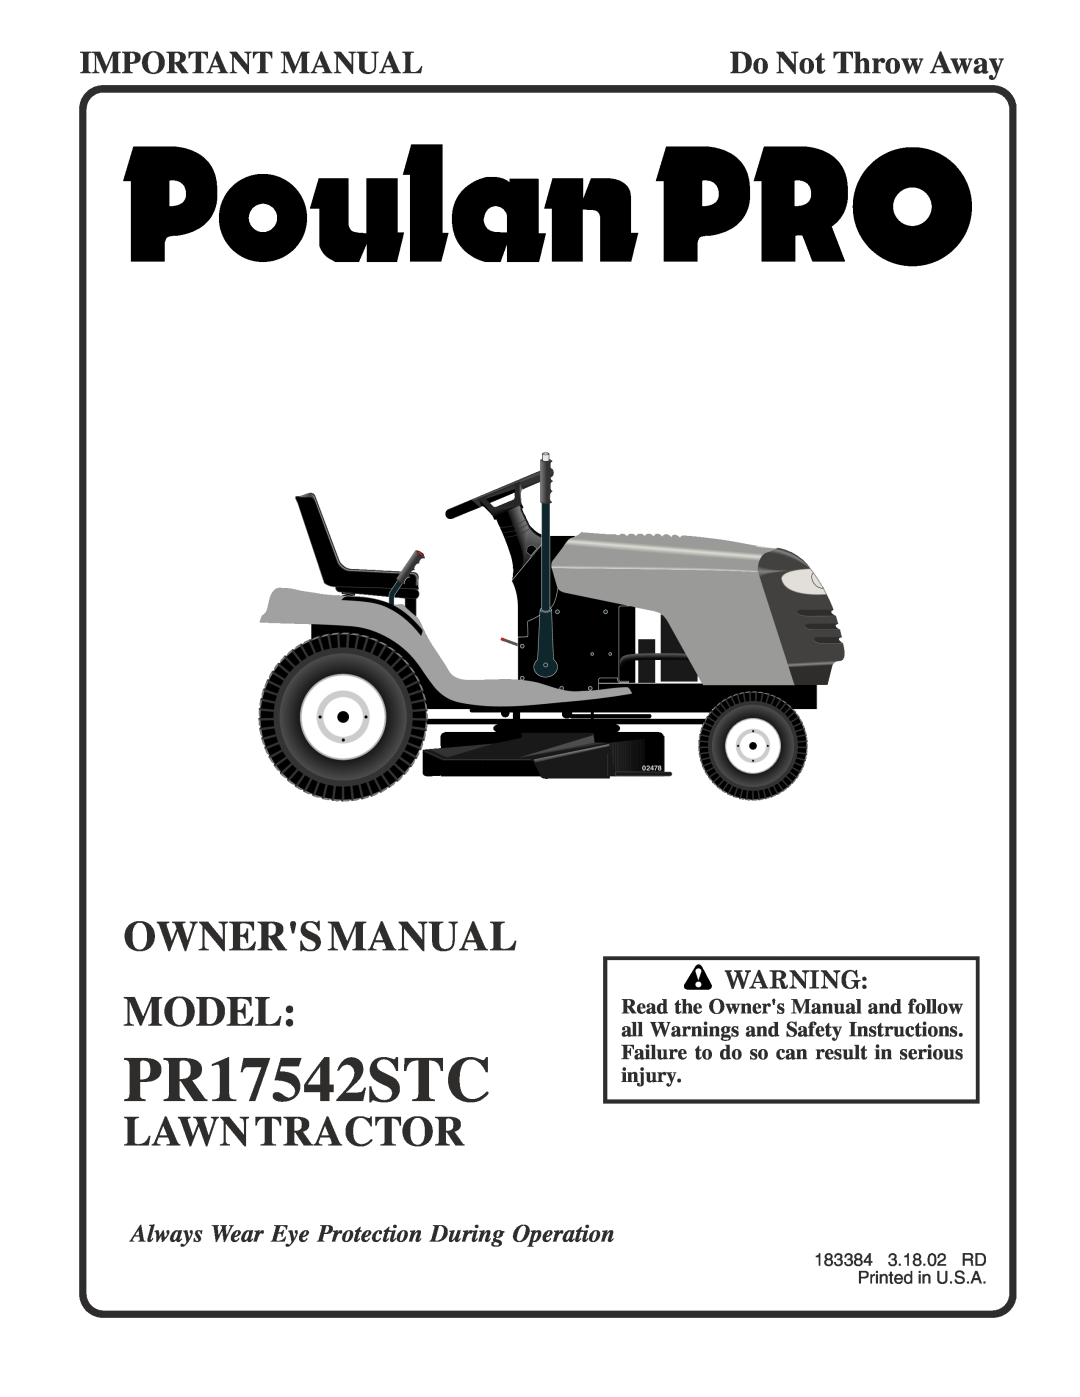 Poulan PR17542STC owner manual Lawntractor, Important Manual, Do Not Throw Away, 02478 